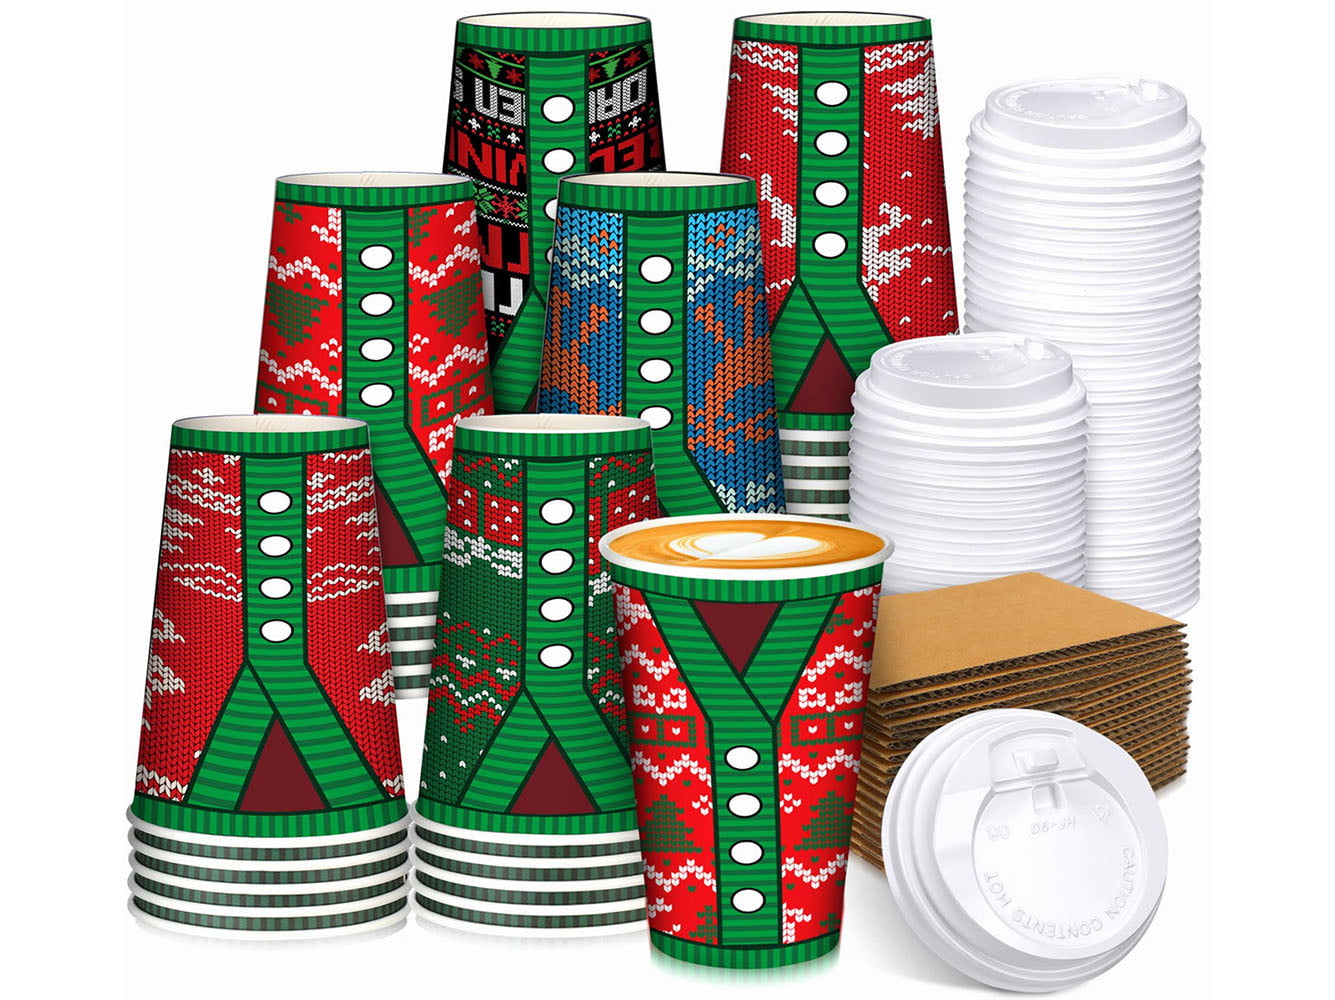 Bapmnicc 50 Pack Christmas Disposable Coffee Cups with Lids & Sleeves, To  Go Coffee Cups, Holiday Di…See more Bapmnicc 50 Pack Christmas Disposable